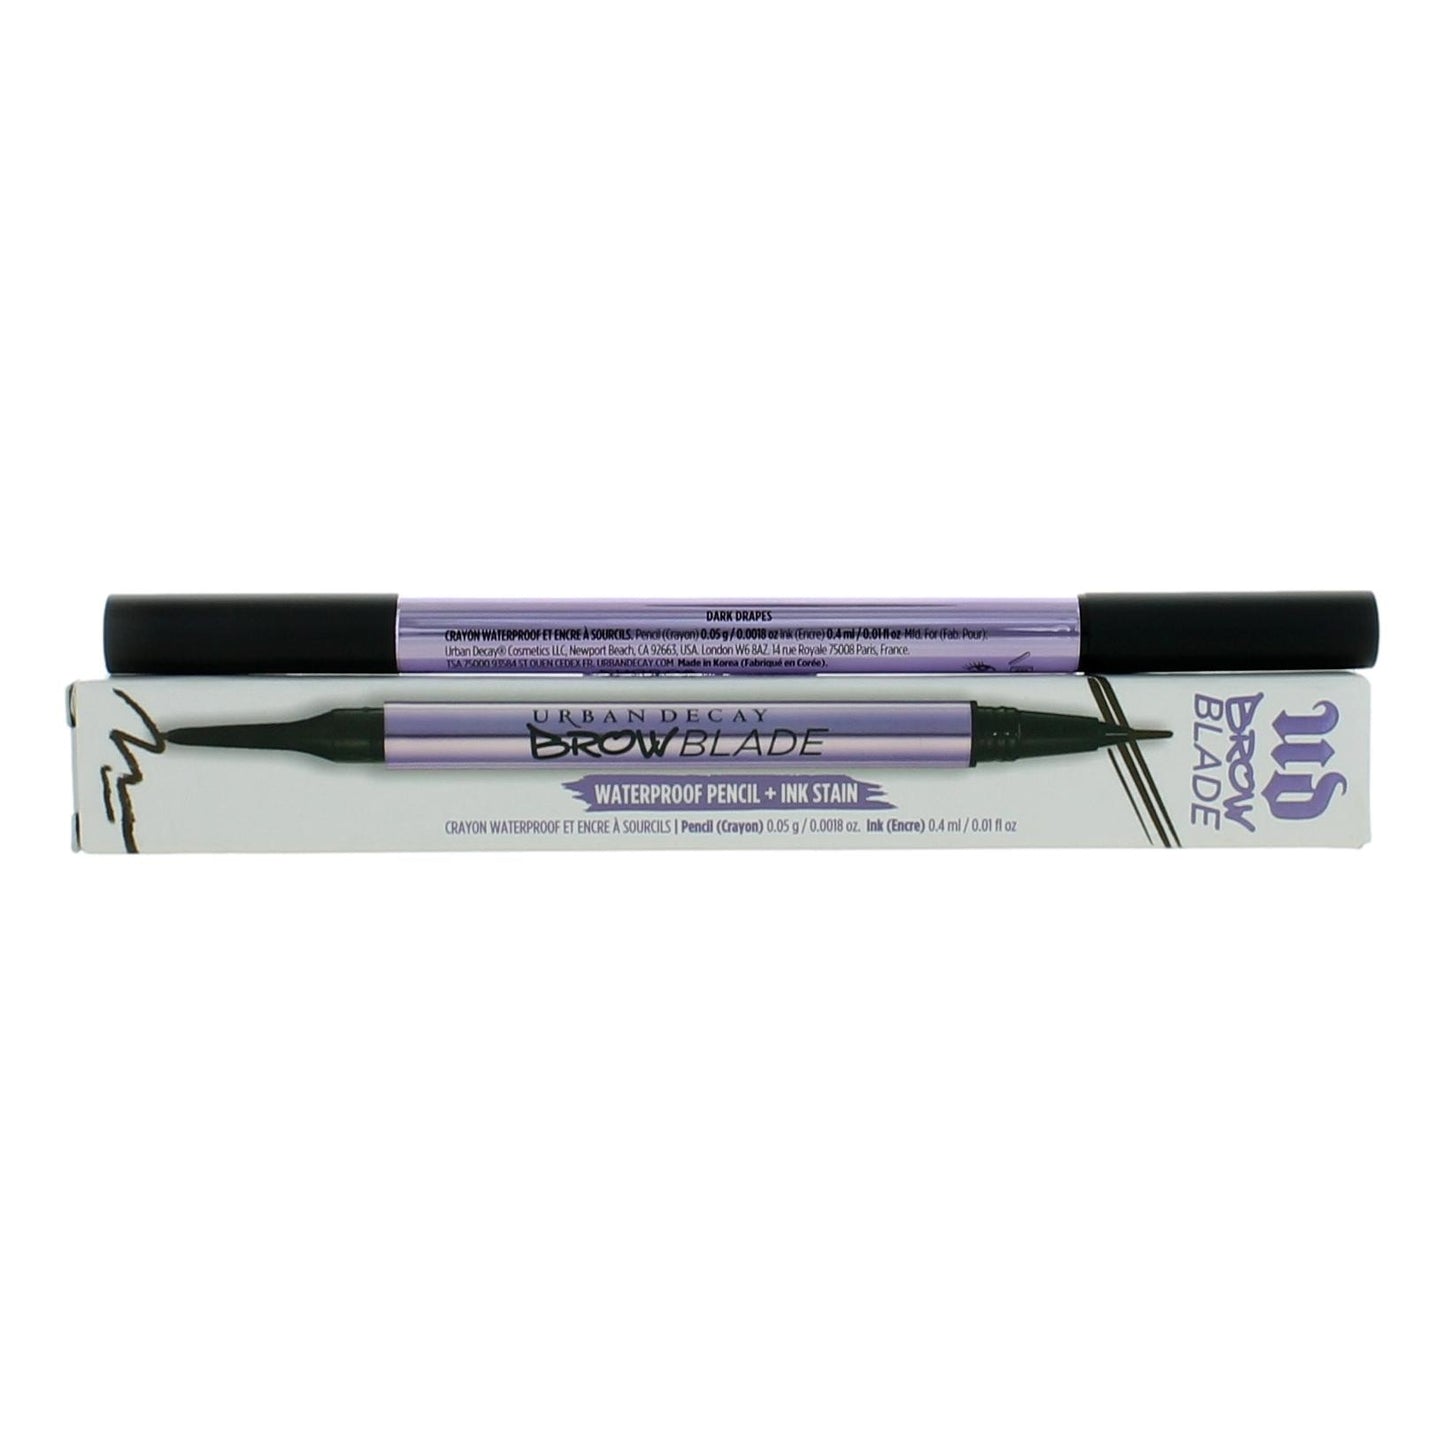 Urban Decay Brow Blade by Urban Decay